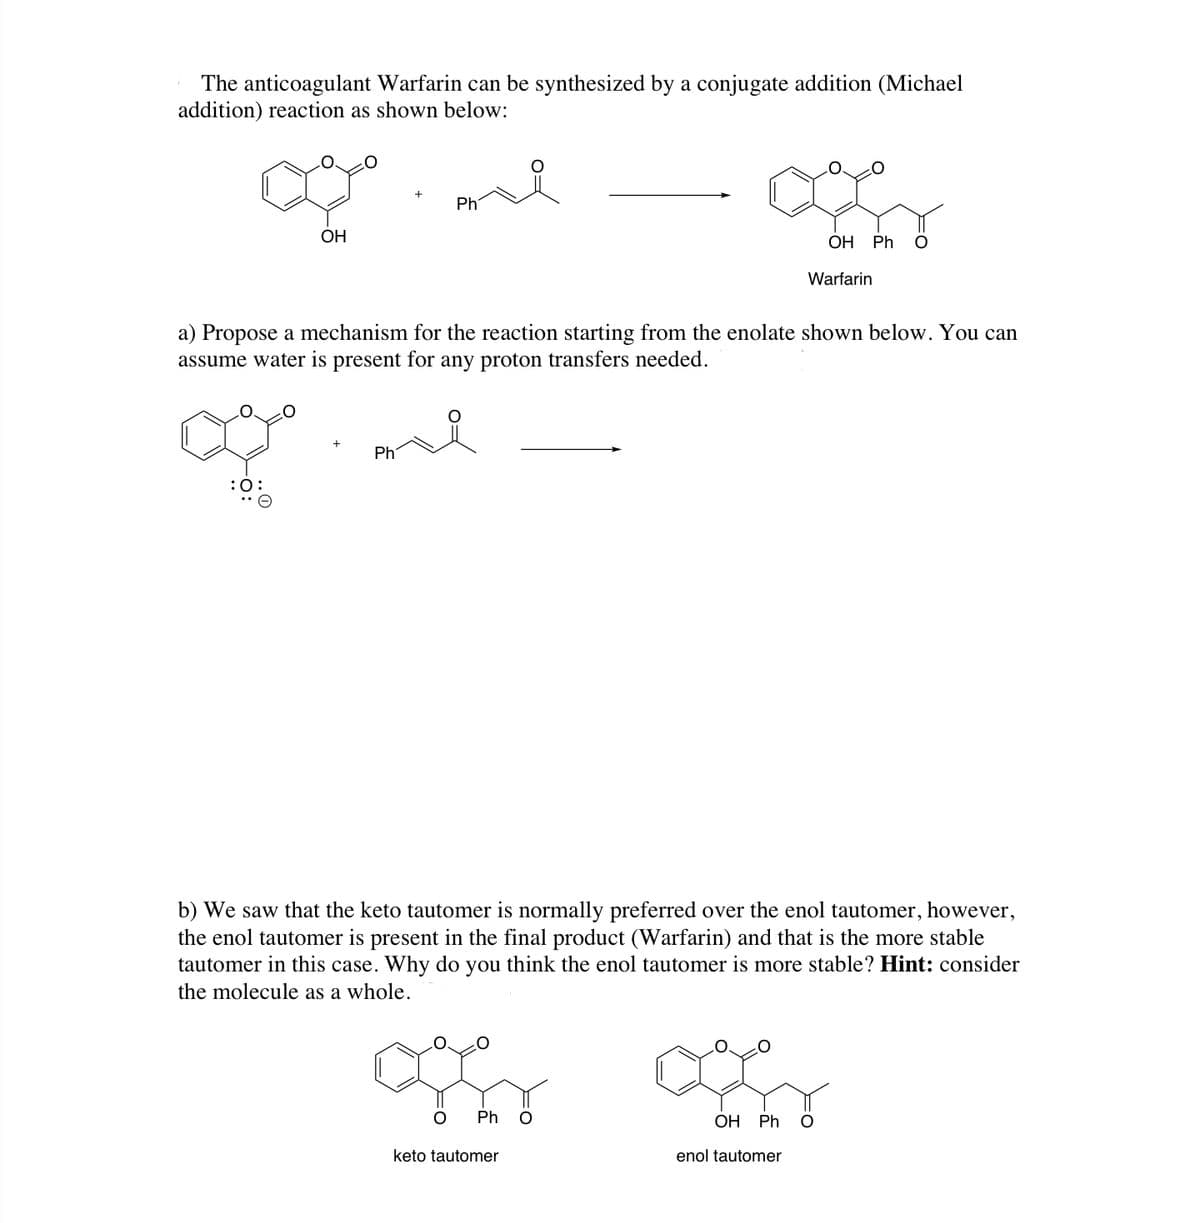 The anticoagulant Warfarin can be synthesized by a conjugate addition (Michael
addition) reaction as shown below:
Ph
OH
ОН Ph O
Warfarin
a) Propose a mechanism for the reaction starting from the enolate shown below. You can
assume water is present for any proton transfers needed.
Ph
:0:
b) We saw that the keto tautomer is normally preferred over the enol tautomer, however,
the enol tautomer is present in the final product (Warfarin) and that is the more stable
tautomer in this case. Why do you think the enol tautomer is more stable? Hint: consider
the molecule as a whole.
Ph
ОН Ph
keto tautomer
enol tautomer
